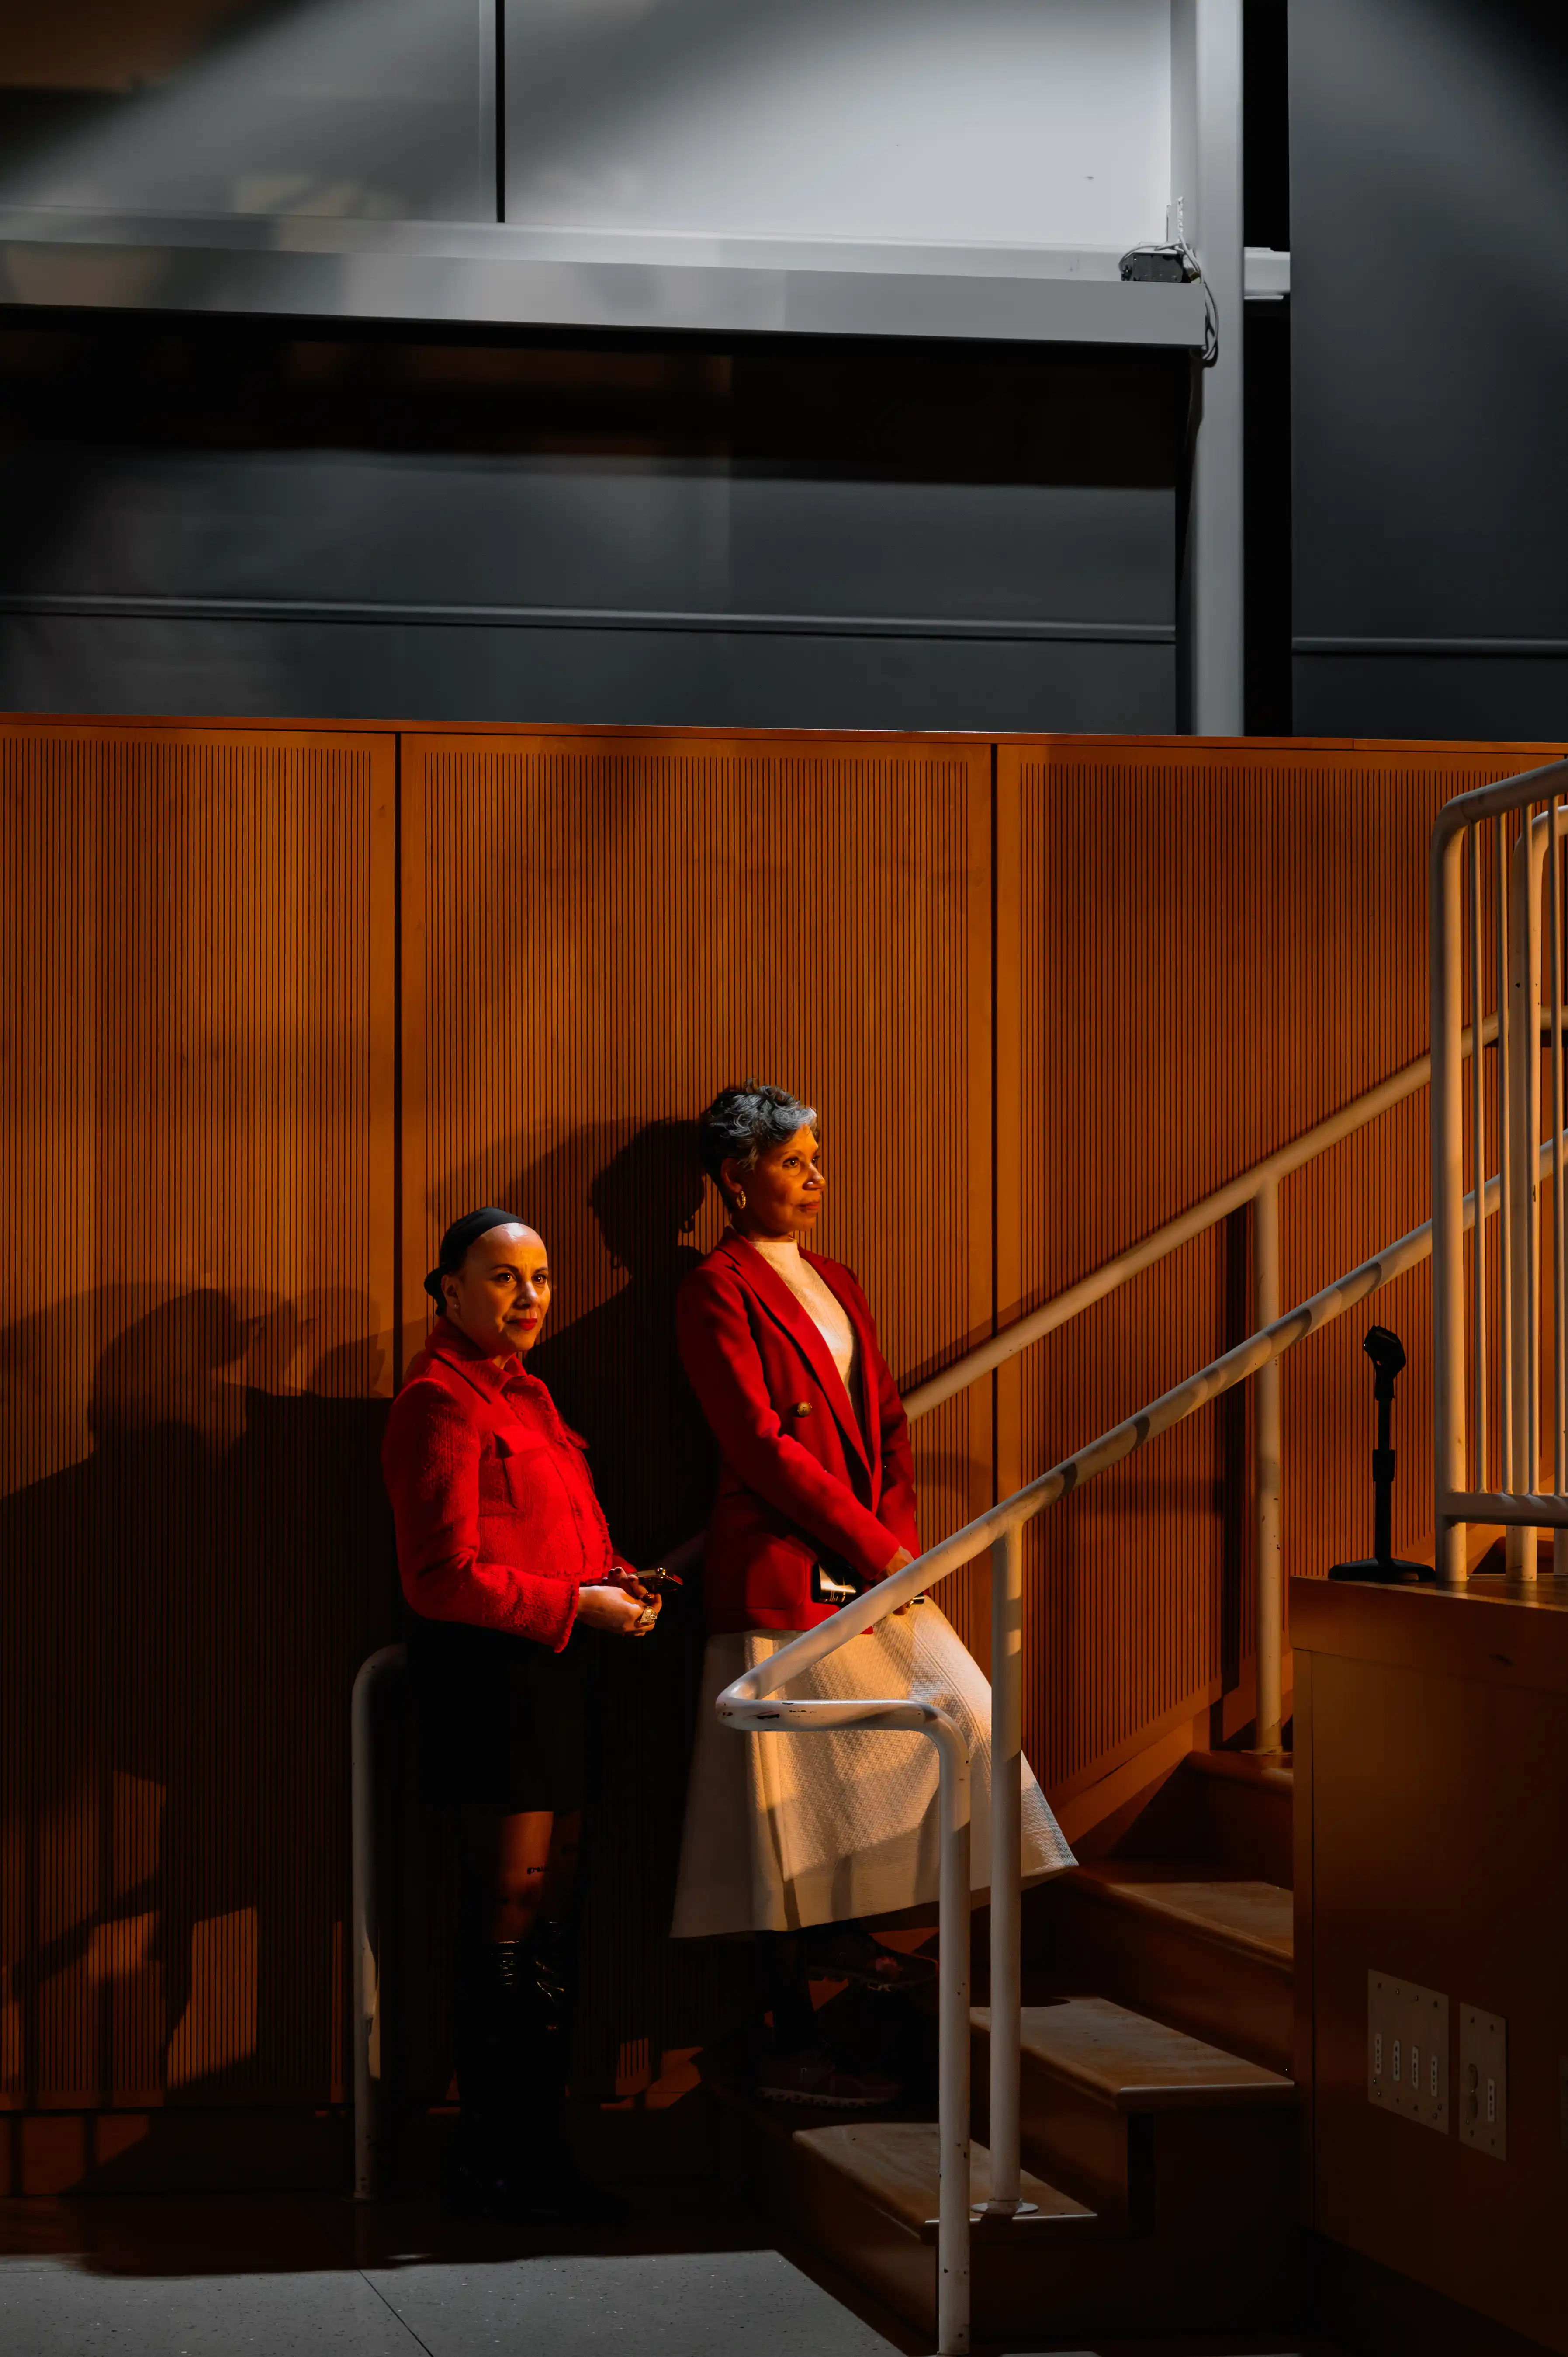 Two individuals in red tops seated on a staircase, with one holding a white handbag, in a dimly lit room with wooden walls.